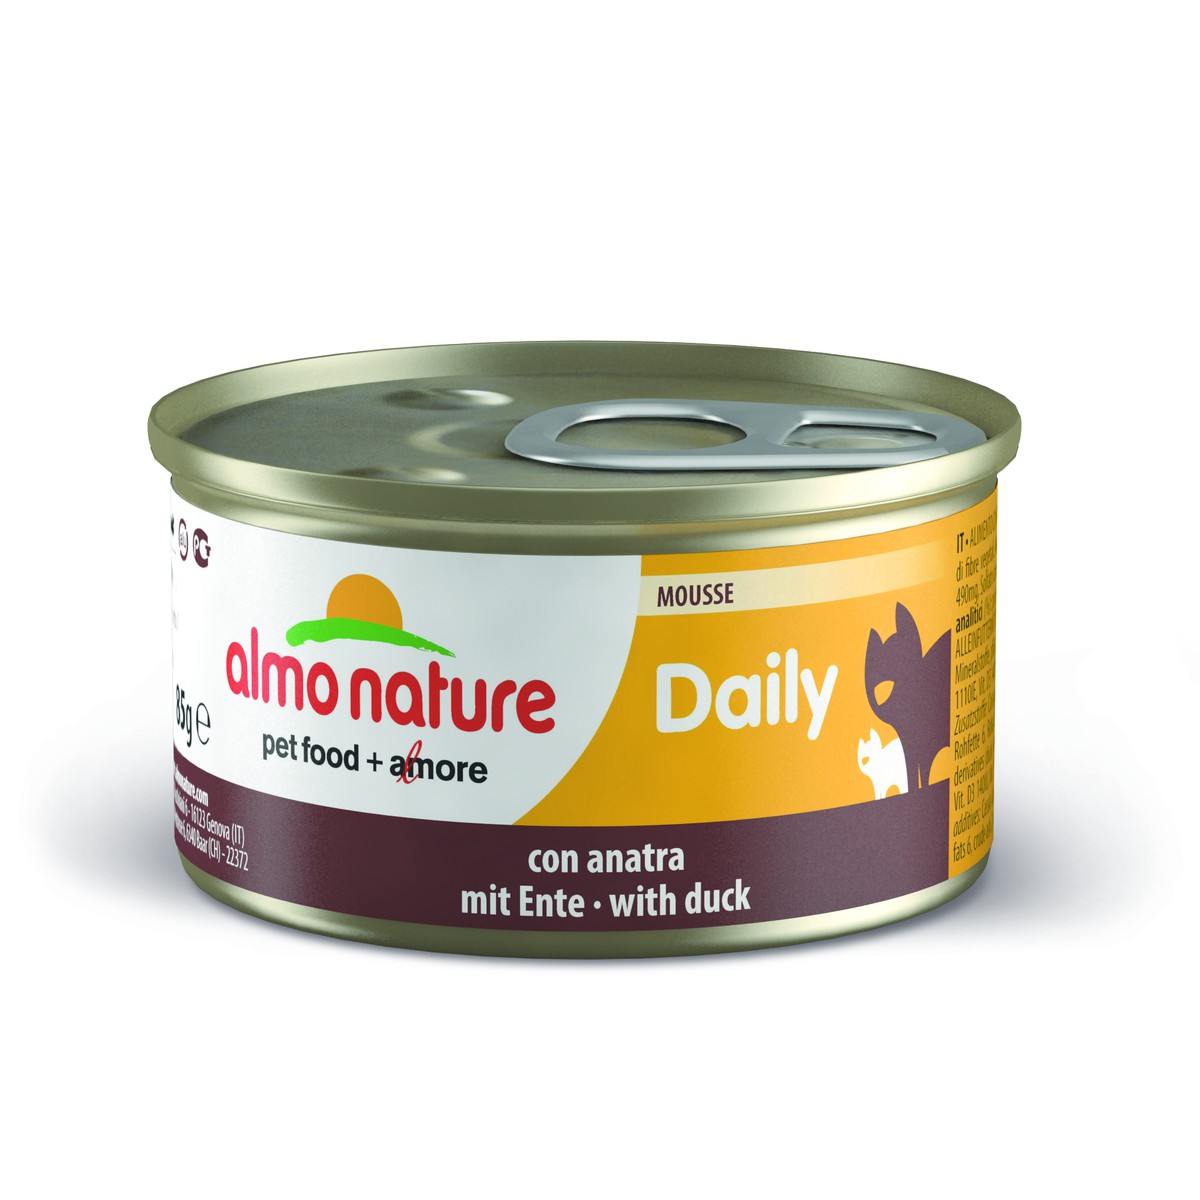 Almo nature  Almo nature PFC Cat Daily menu Mousse Canard 85g  85 g